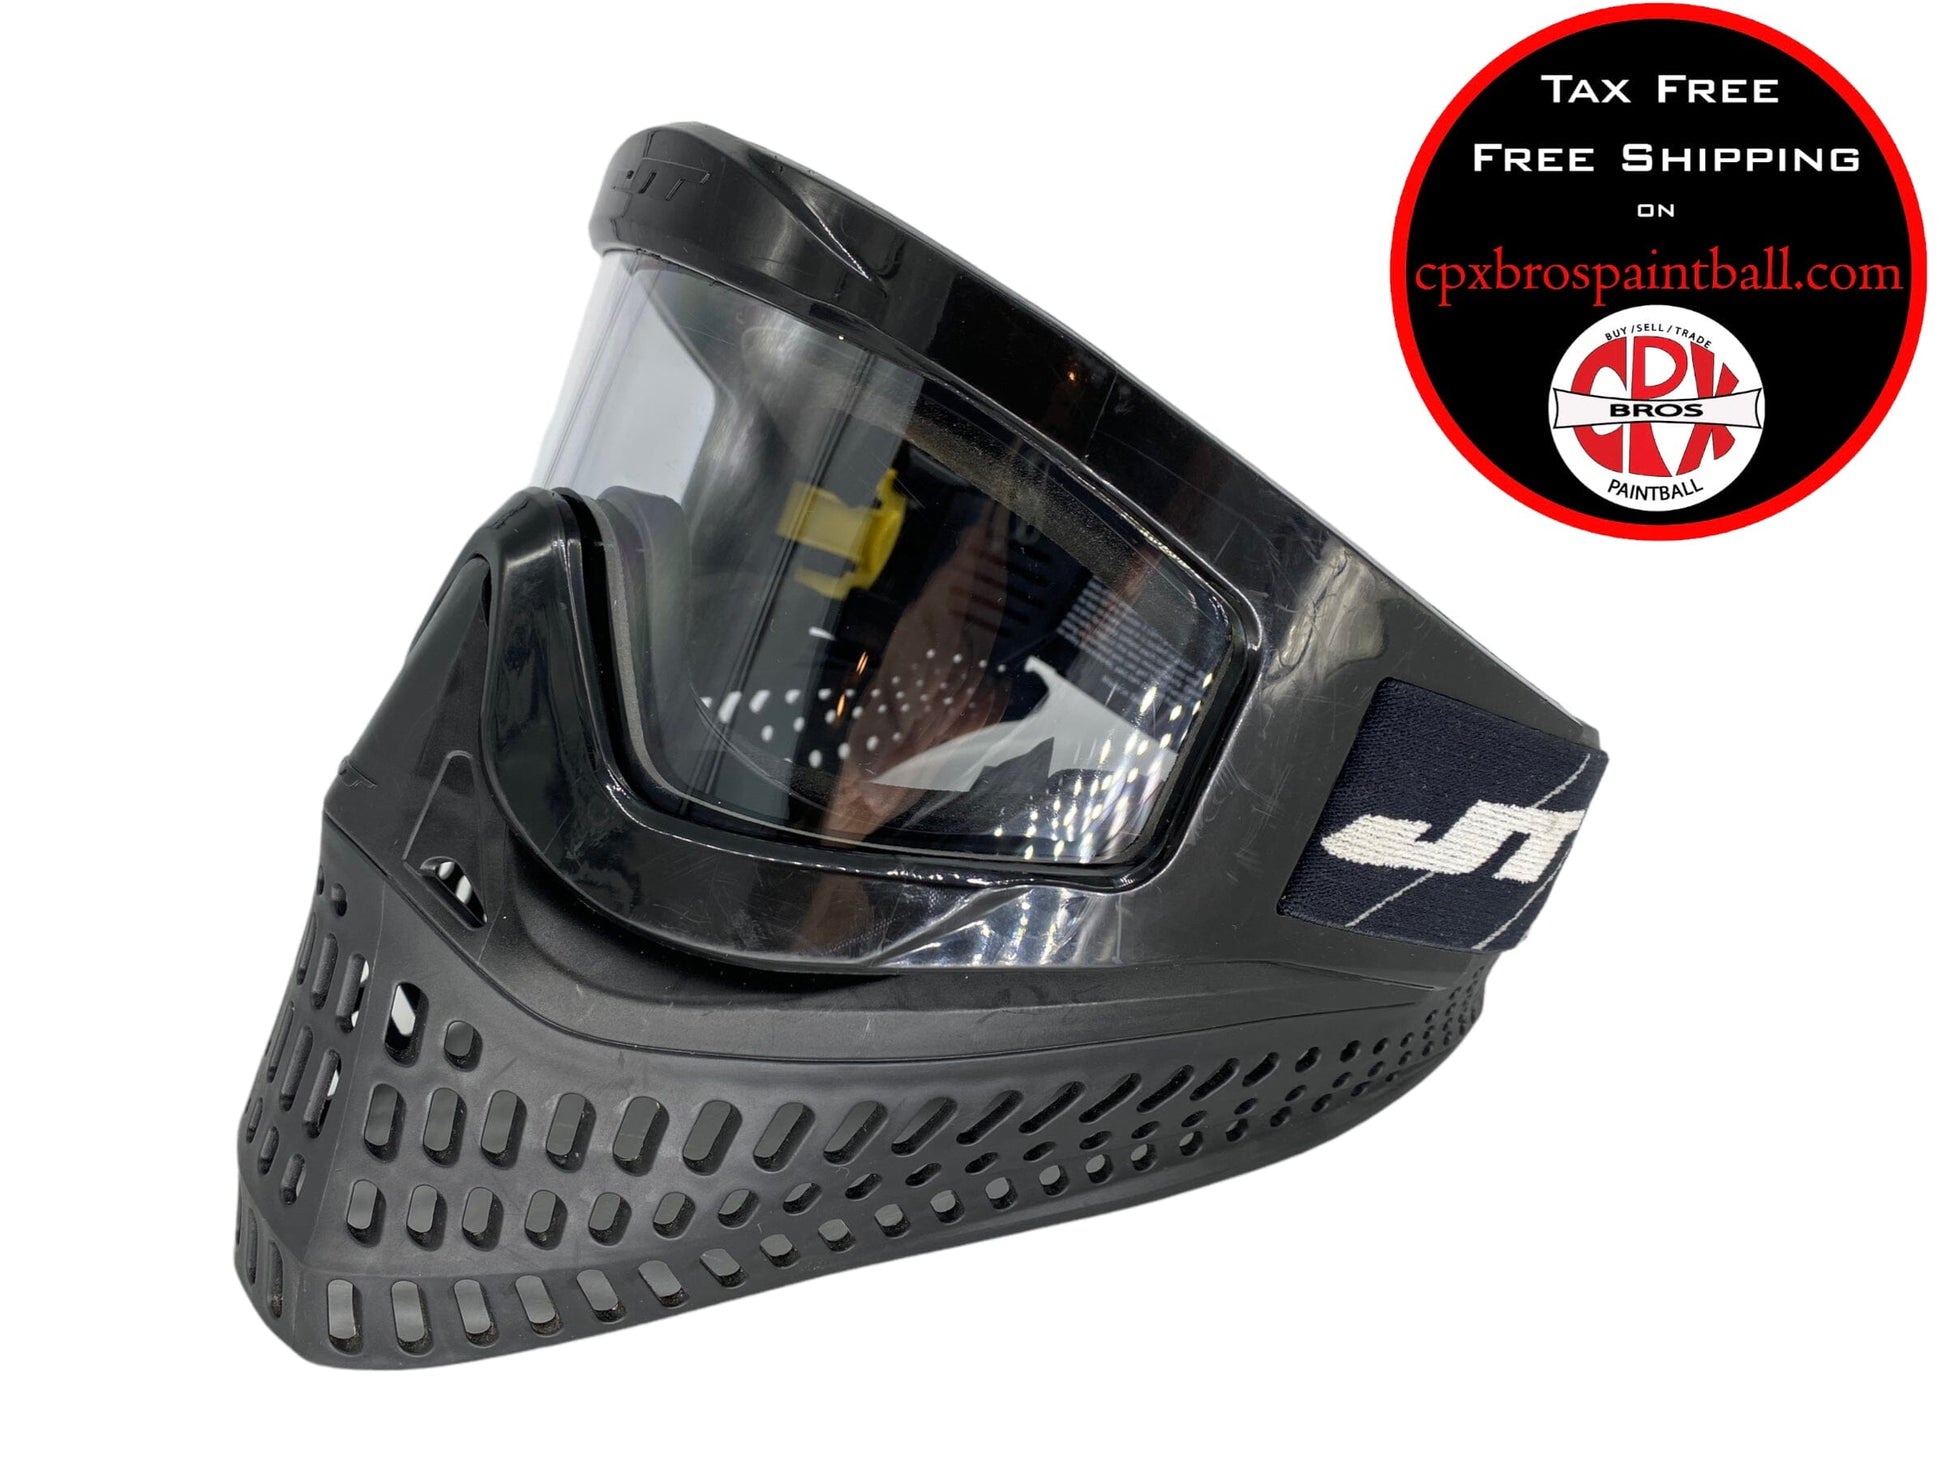 Used Jt Proflex X Mask Paintball Gun from CPXBrosPaintball Buy/Sell/Trade Paintball Markers, Paintball Hoppers, Paintball Masks, and Hormesis Headbands